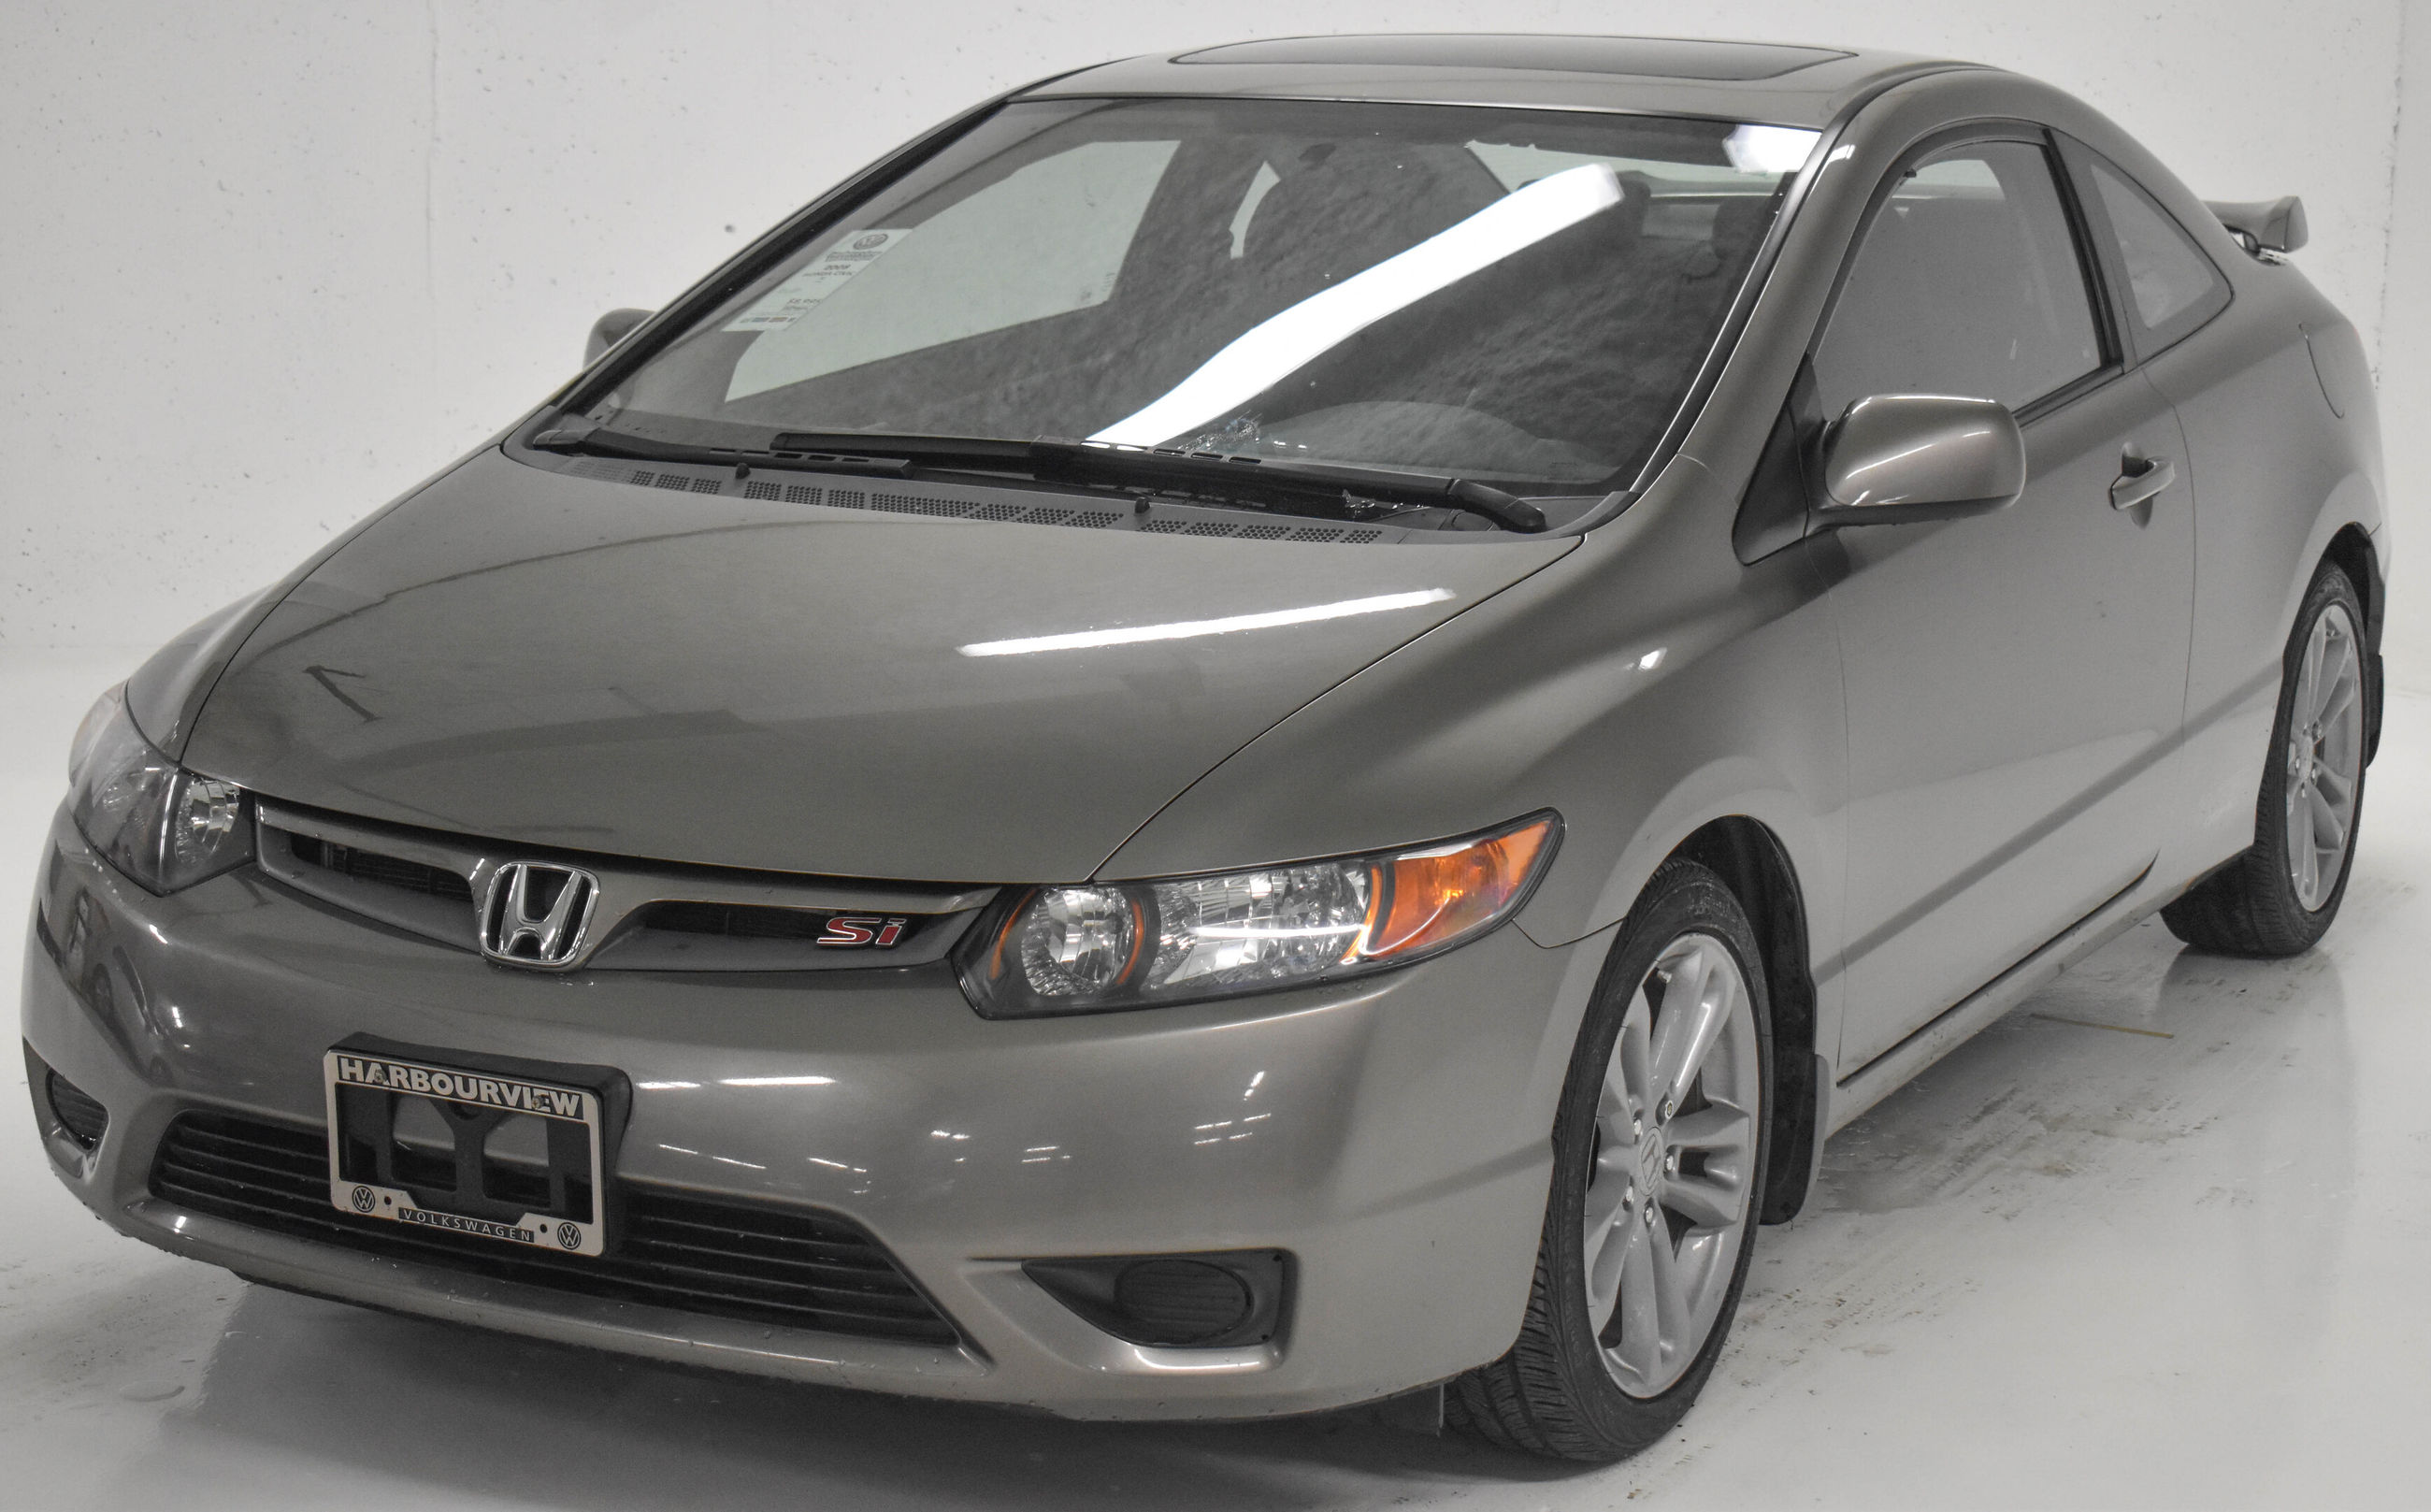 Used 2008 Honda Civic Coupe Si 6Speed for Sale 8776